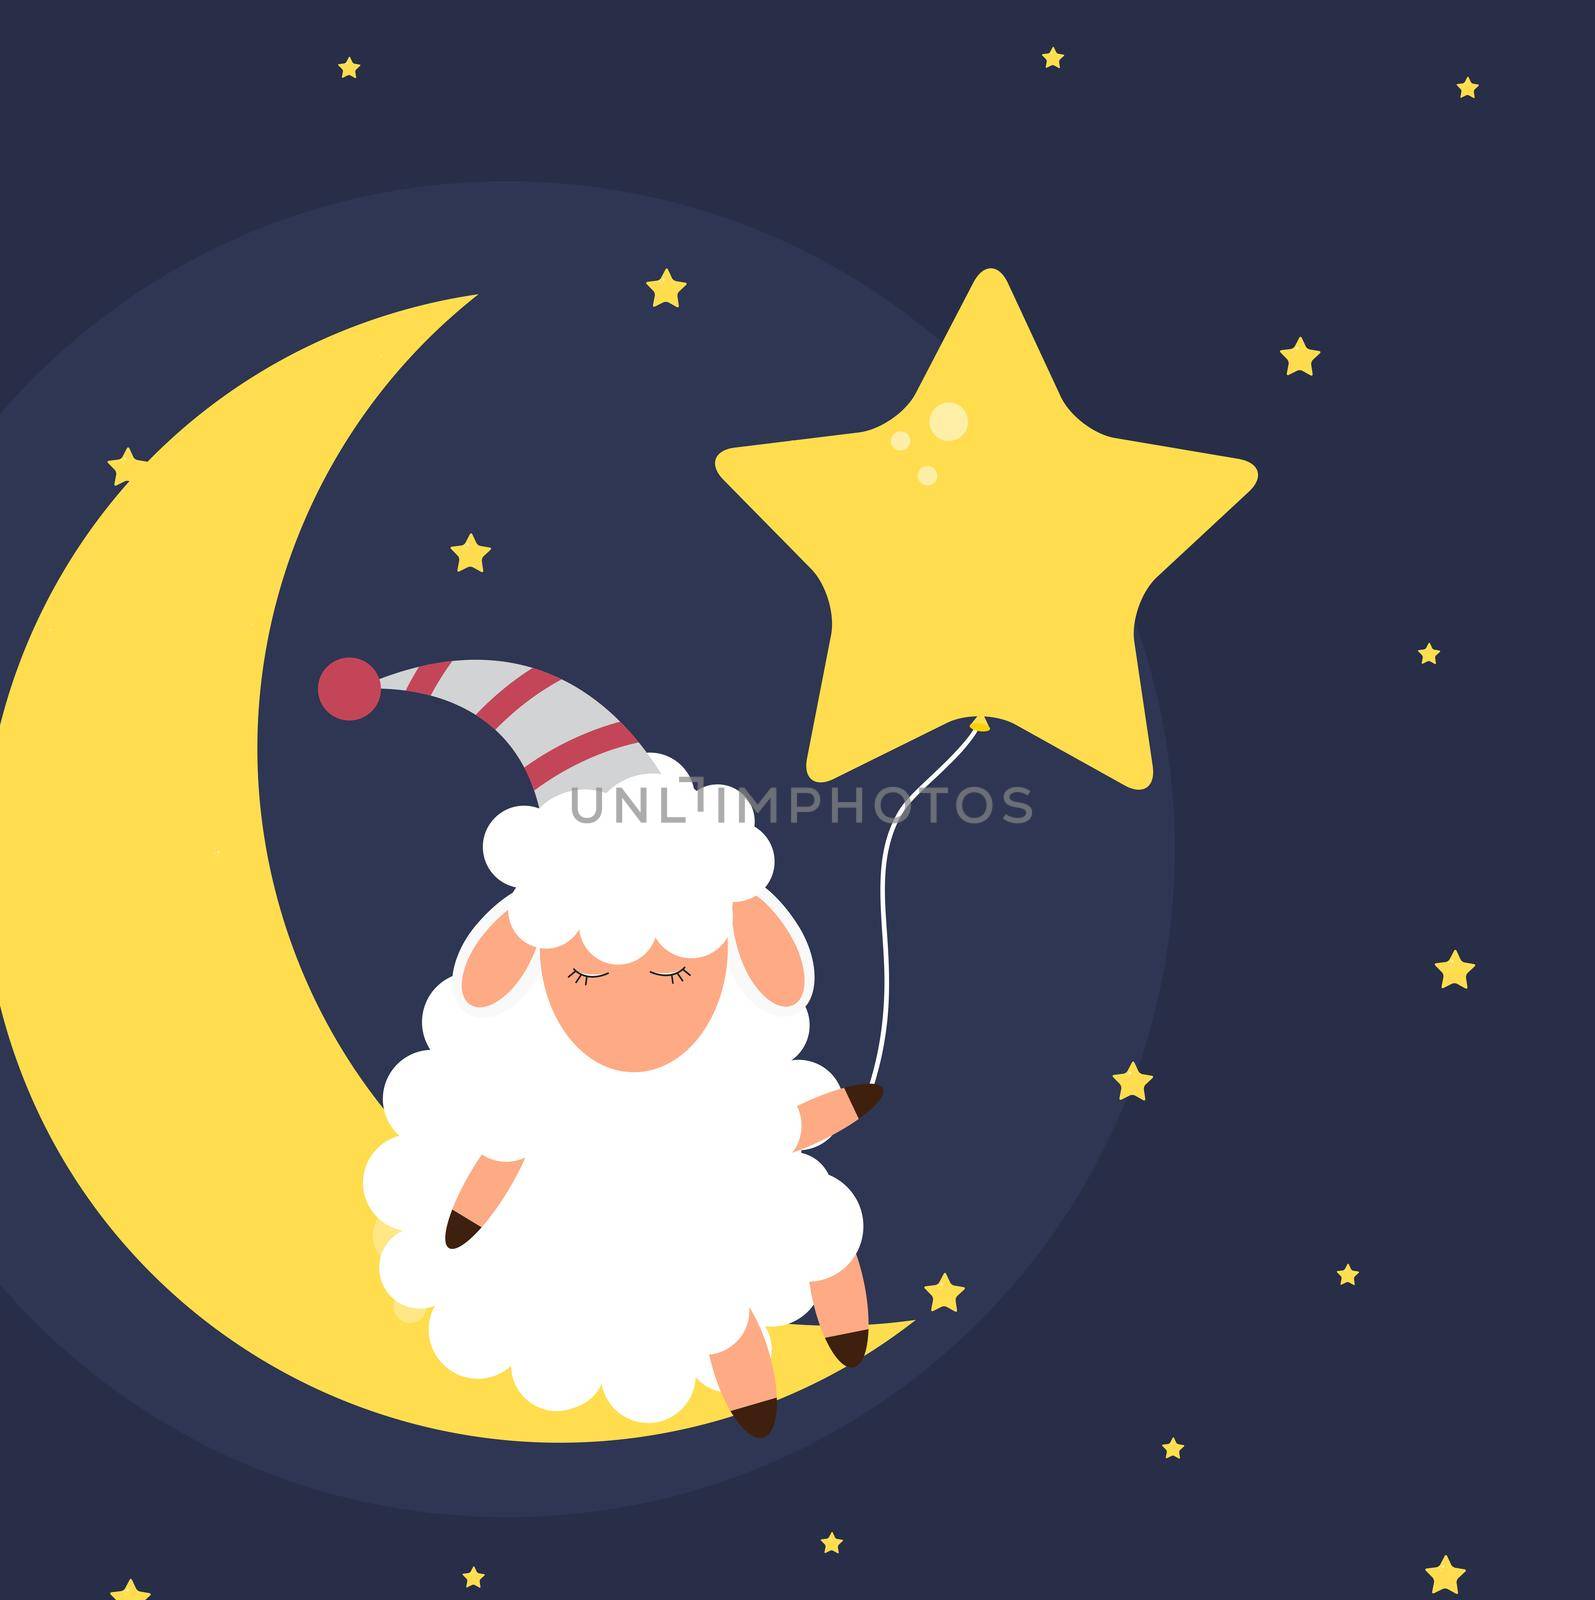 Cute little sheep on the night sky. Sweet dreams. vector illustration. EPS10